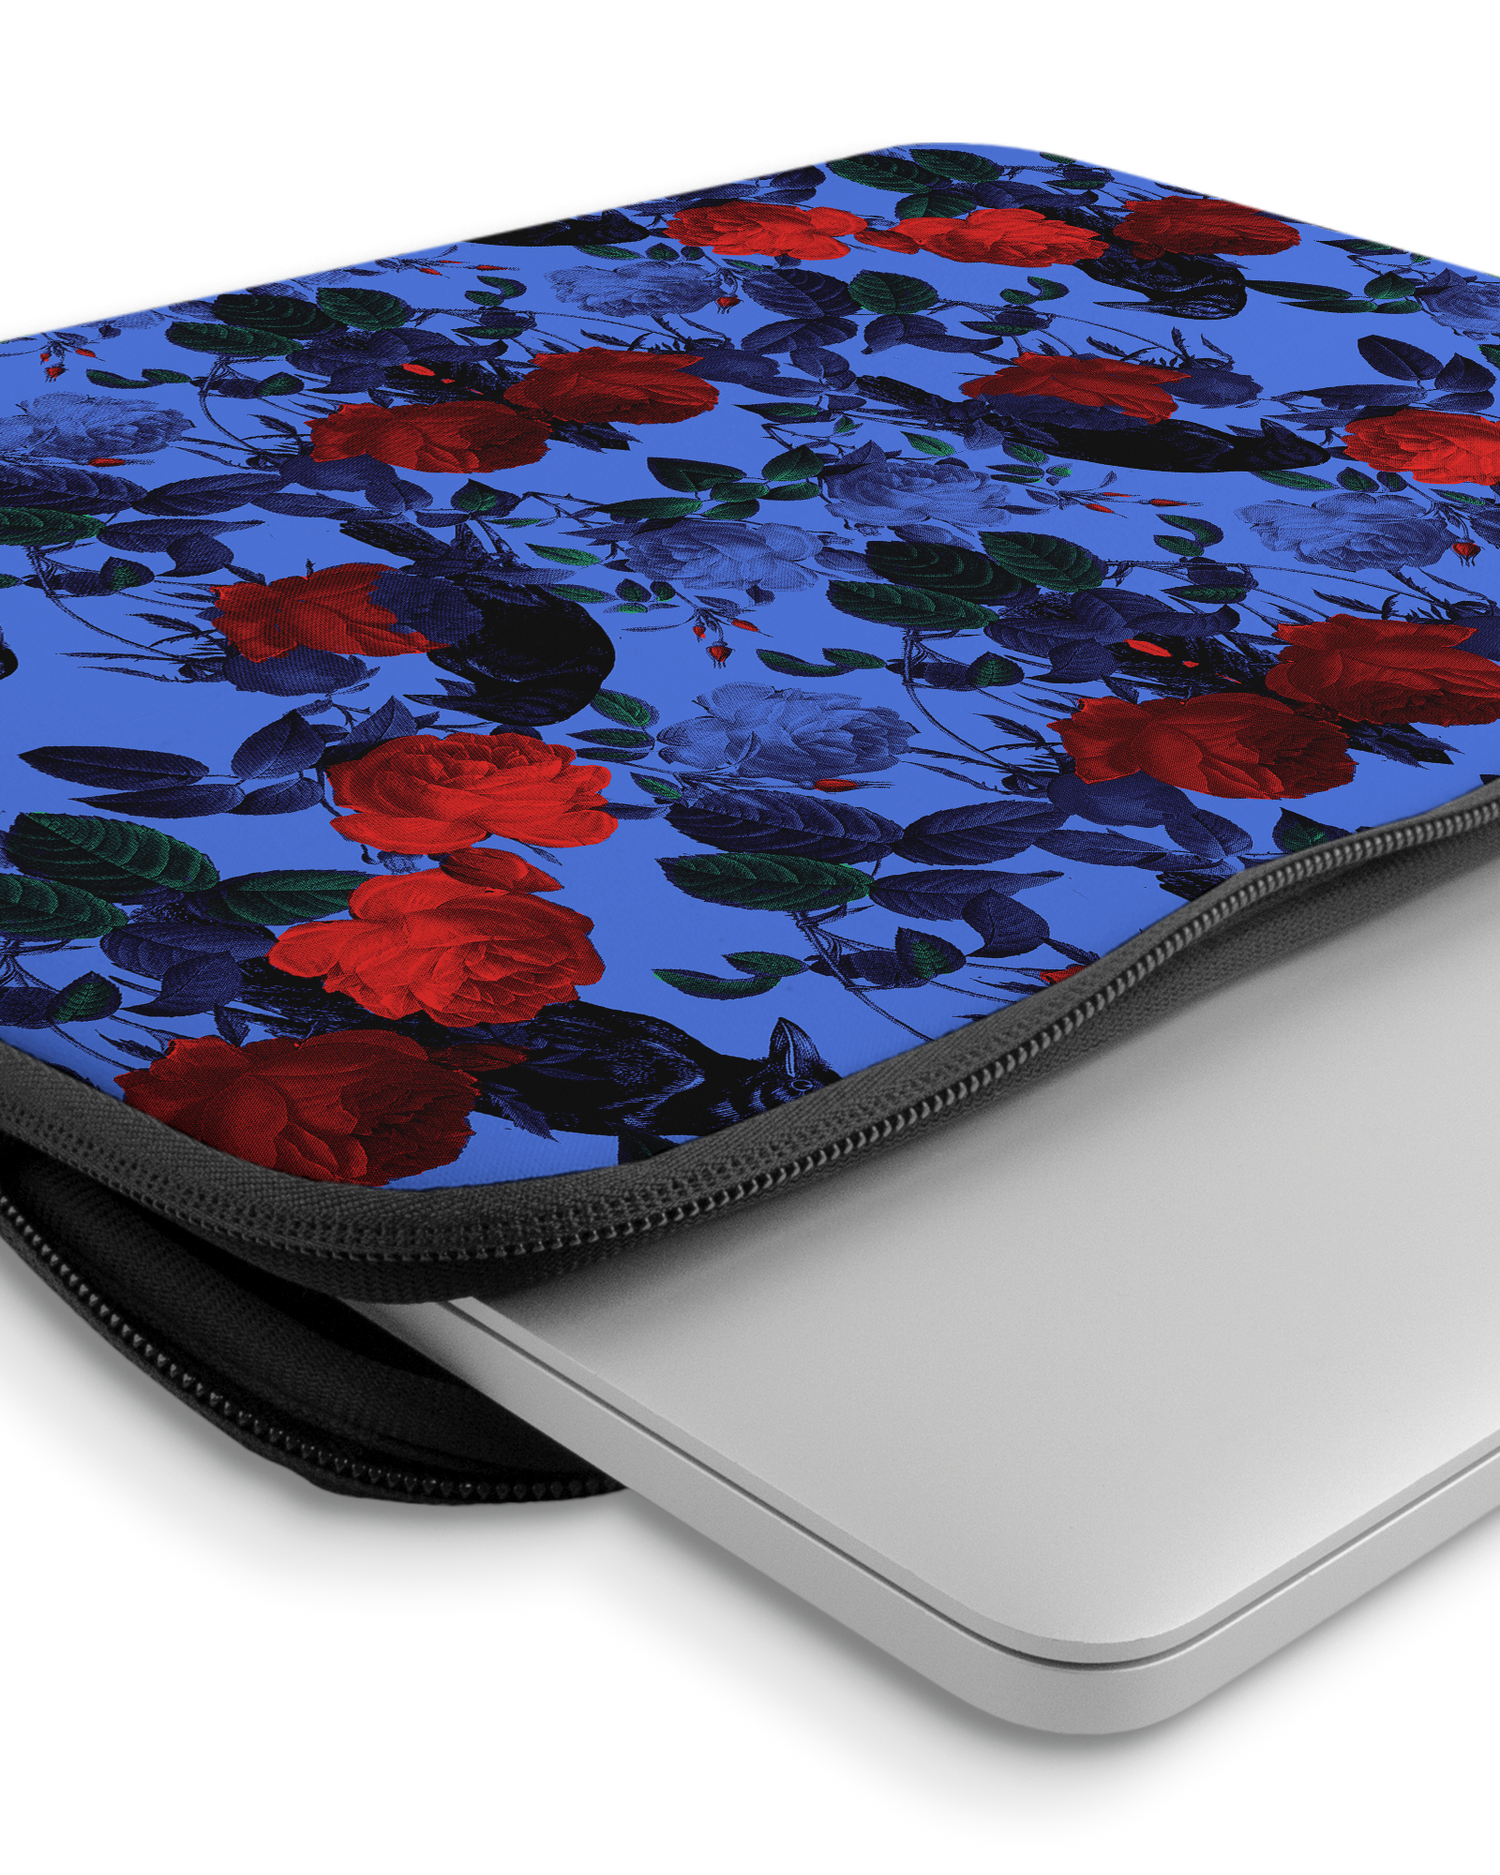 Roses And Ravens Laptop Case 14-15 inch with device inside